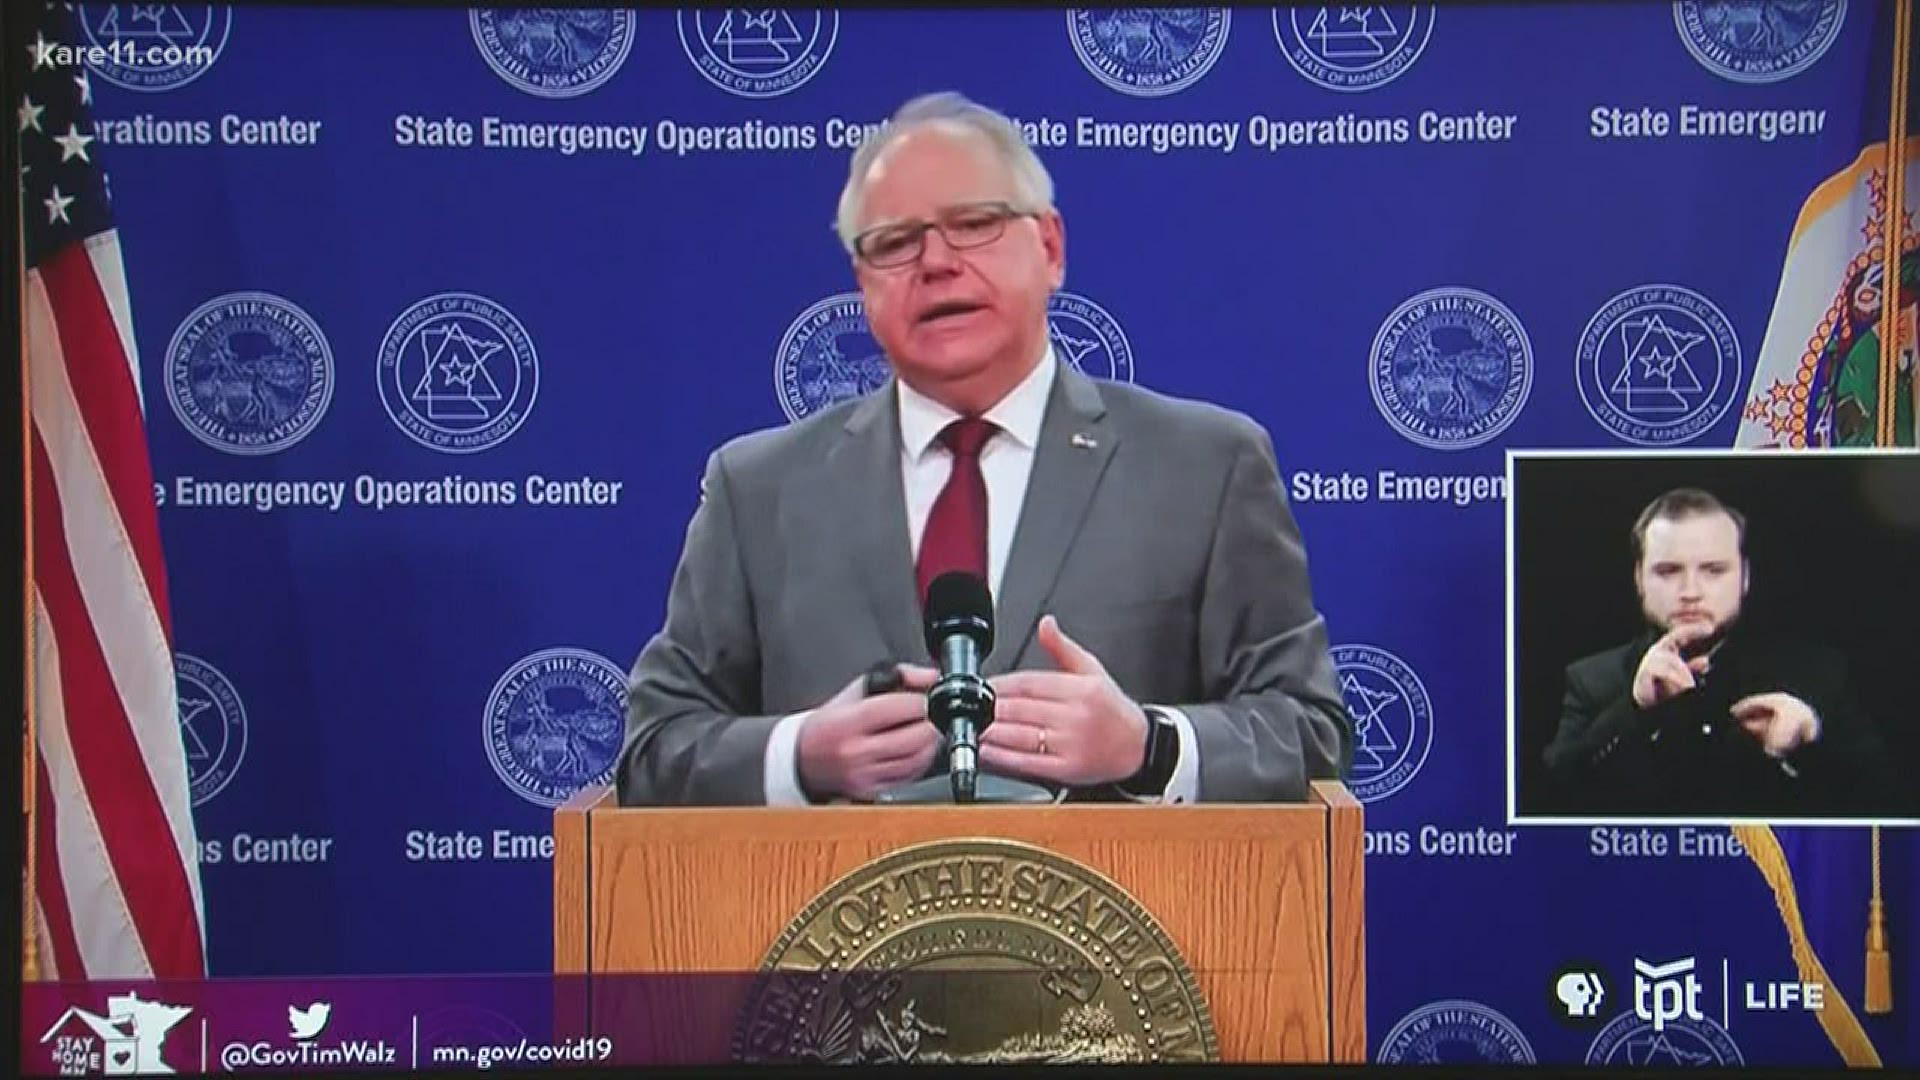 Minnesota Gov. Tim Walz has extended the state's Stay at Home order until May 18, with some loosened restrictions on retail.